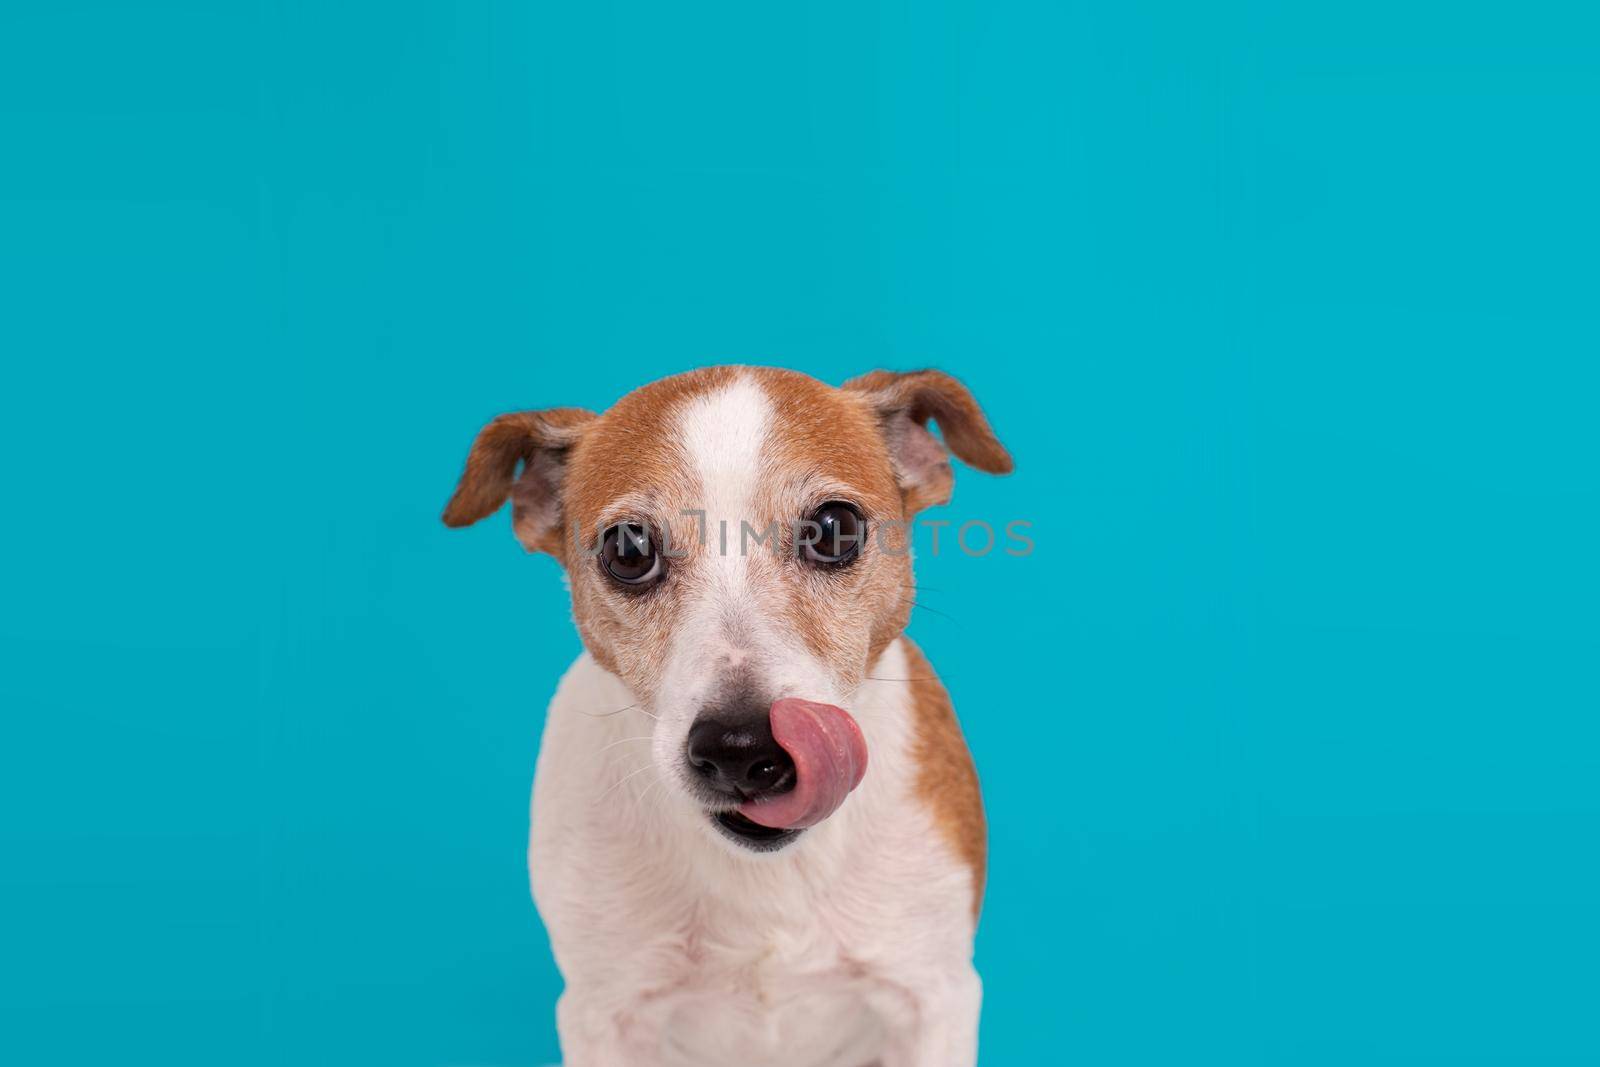 Adorable spotty dog tightening ears and licking nose with pink tongue on turquoise background